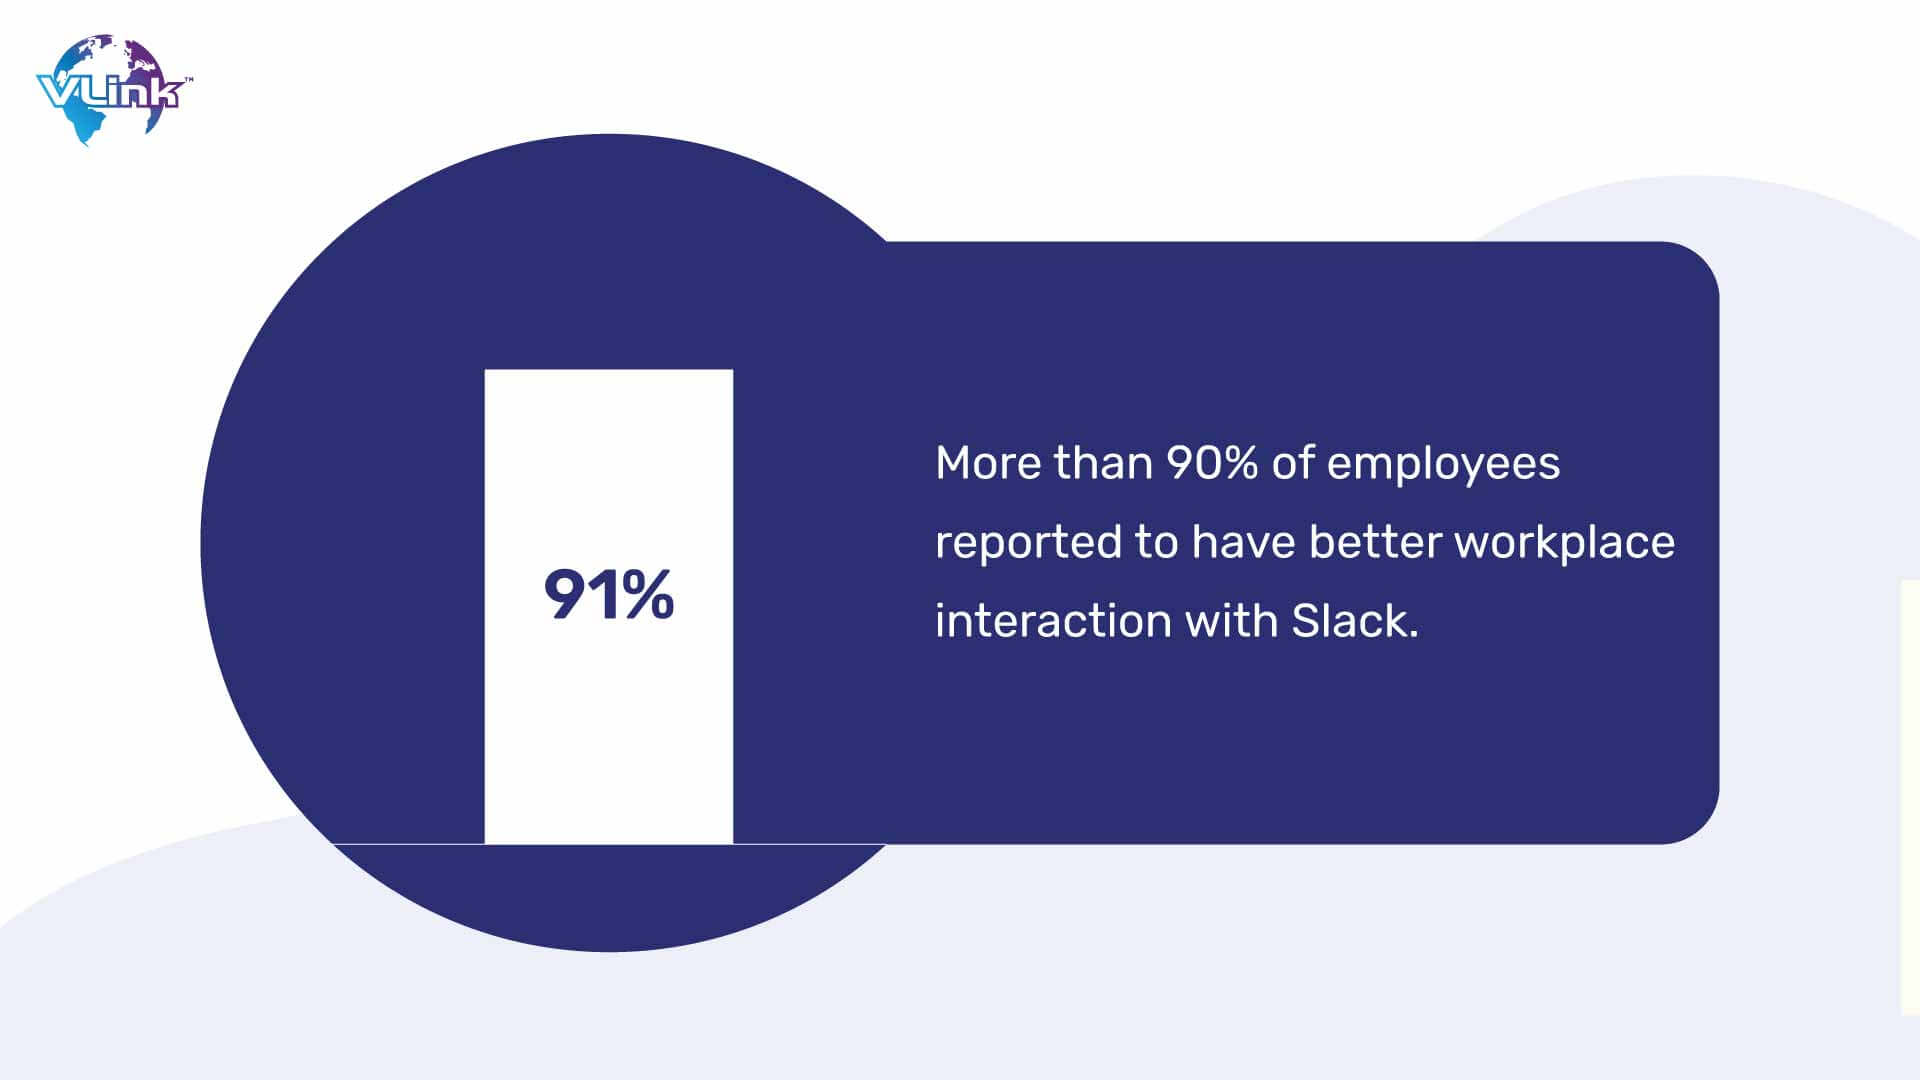 More than 90% of employees reported to have better workplace interaction with Slack